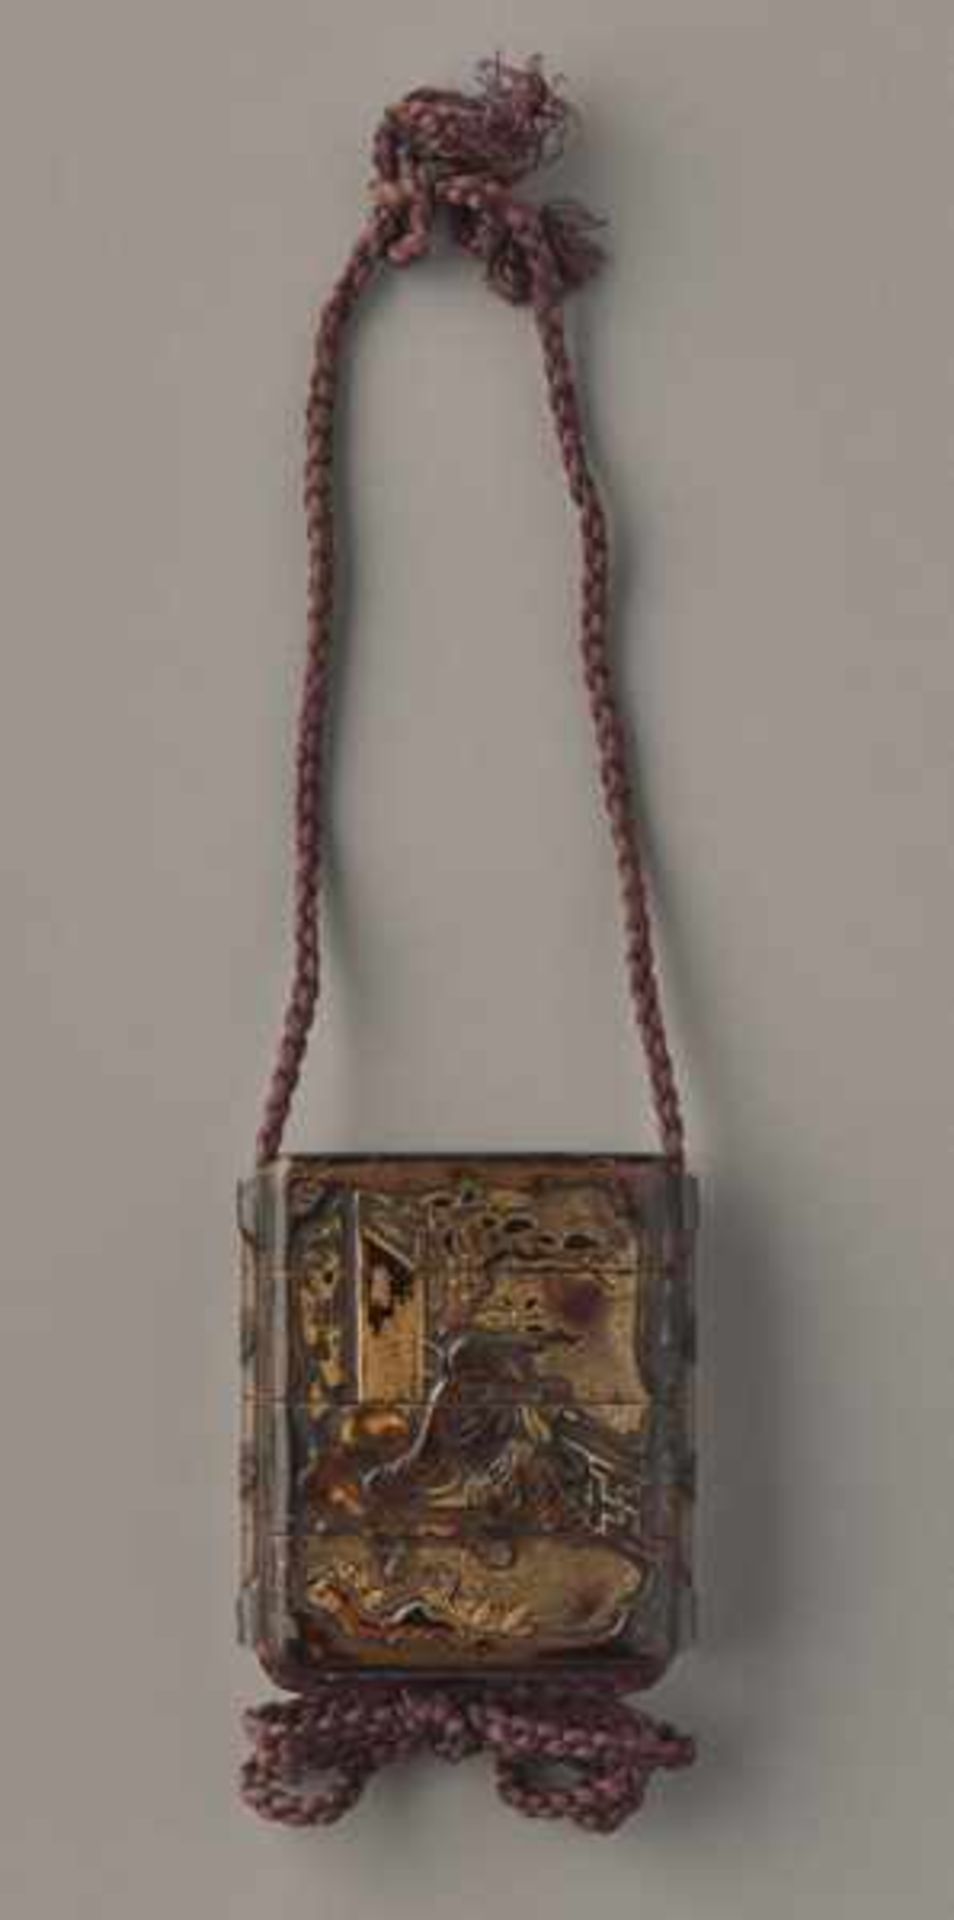 A THREE CASE LA CQUER AND GOLD INRO OF TWO SAGES Lacquer, gold and horn inro, wood and metal - Image 3 of 4